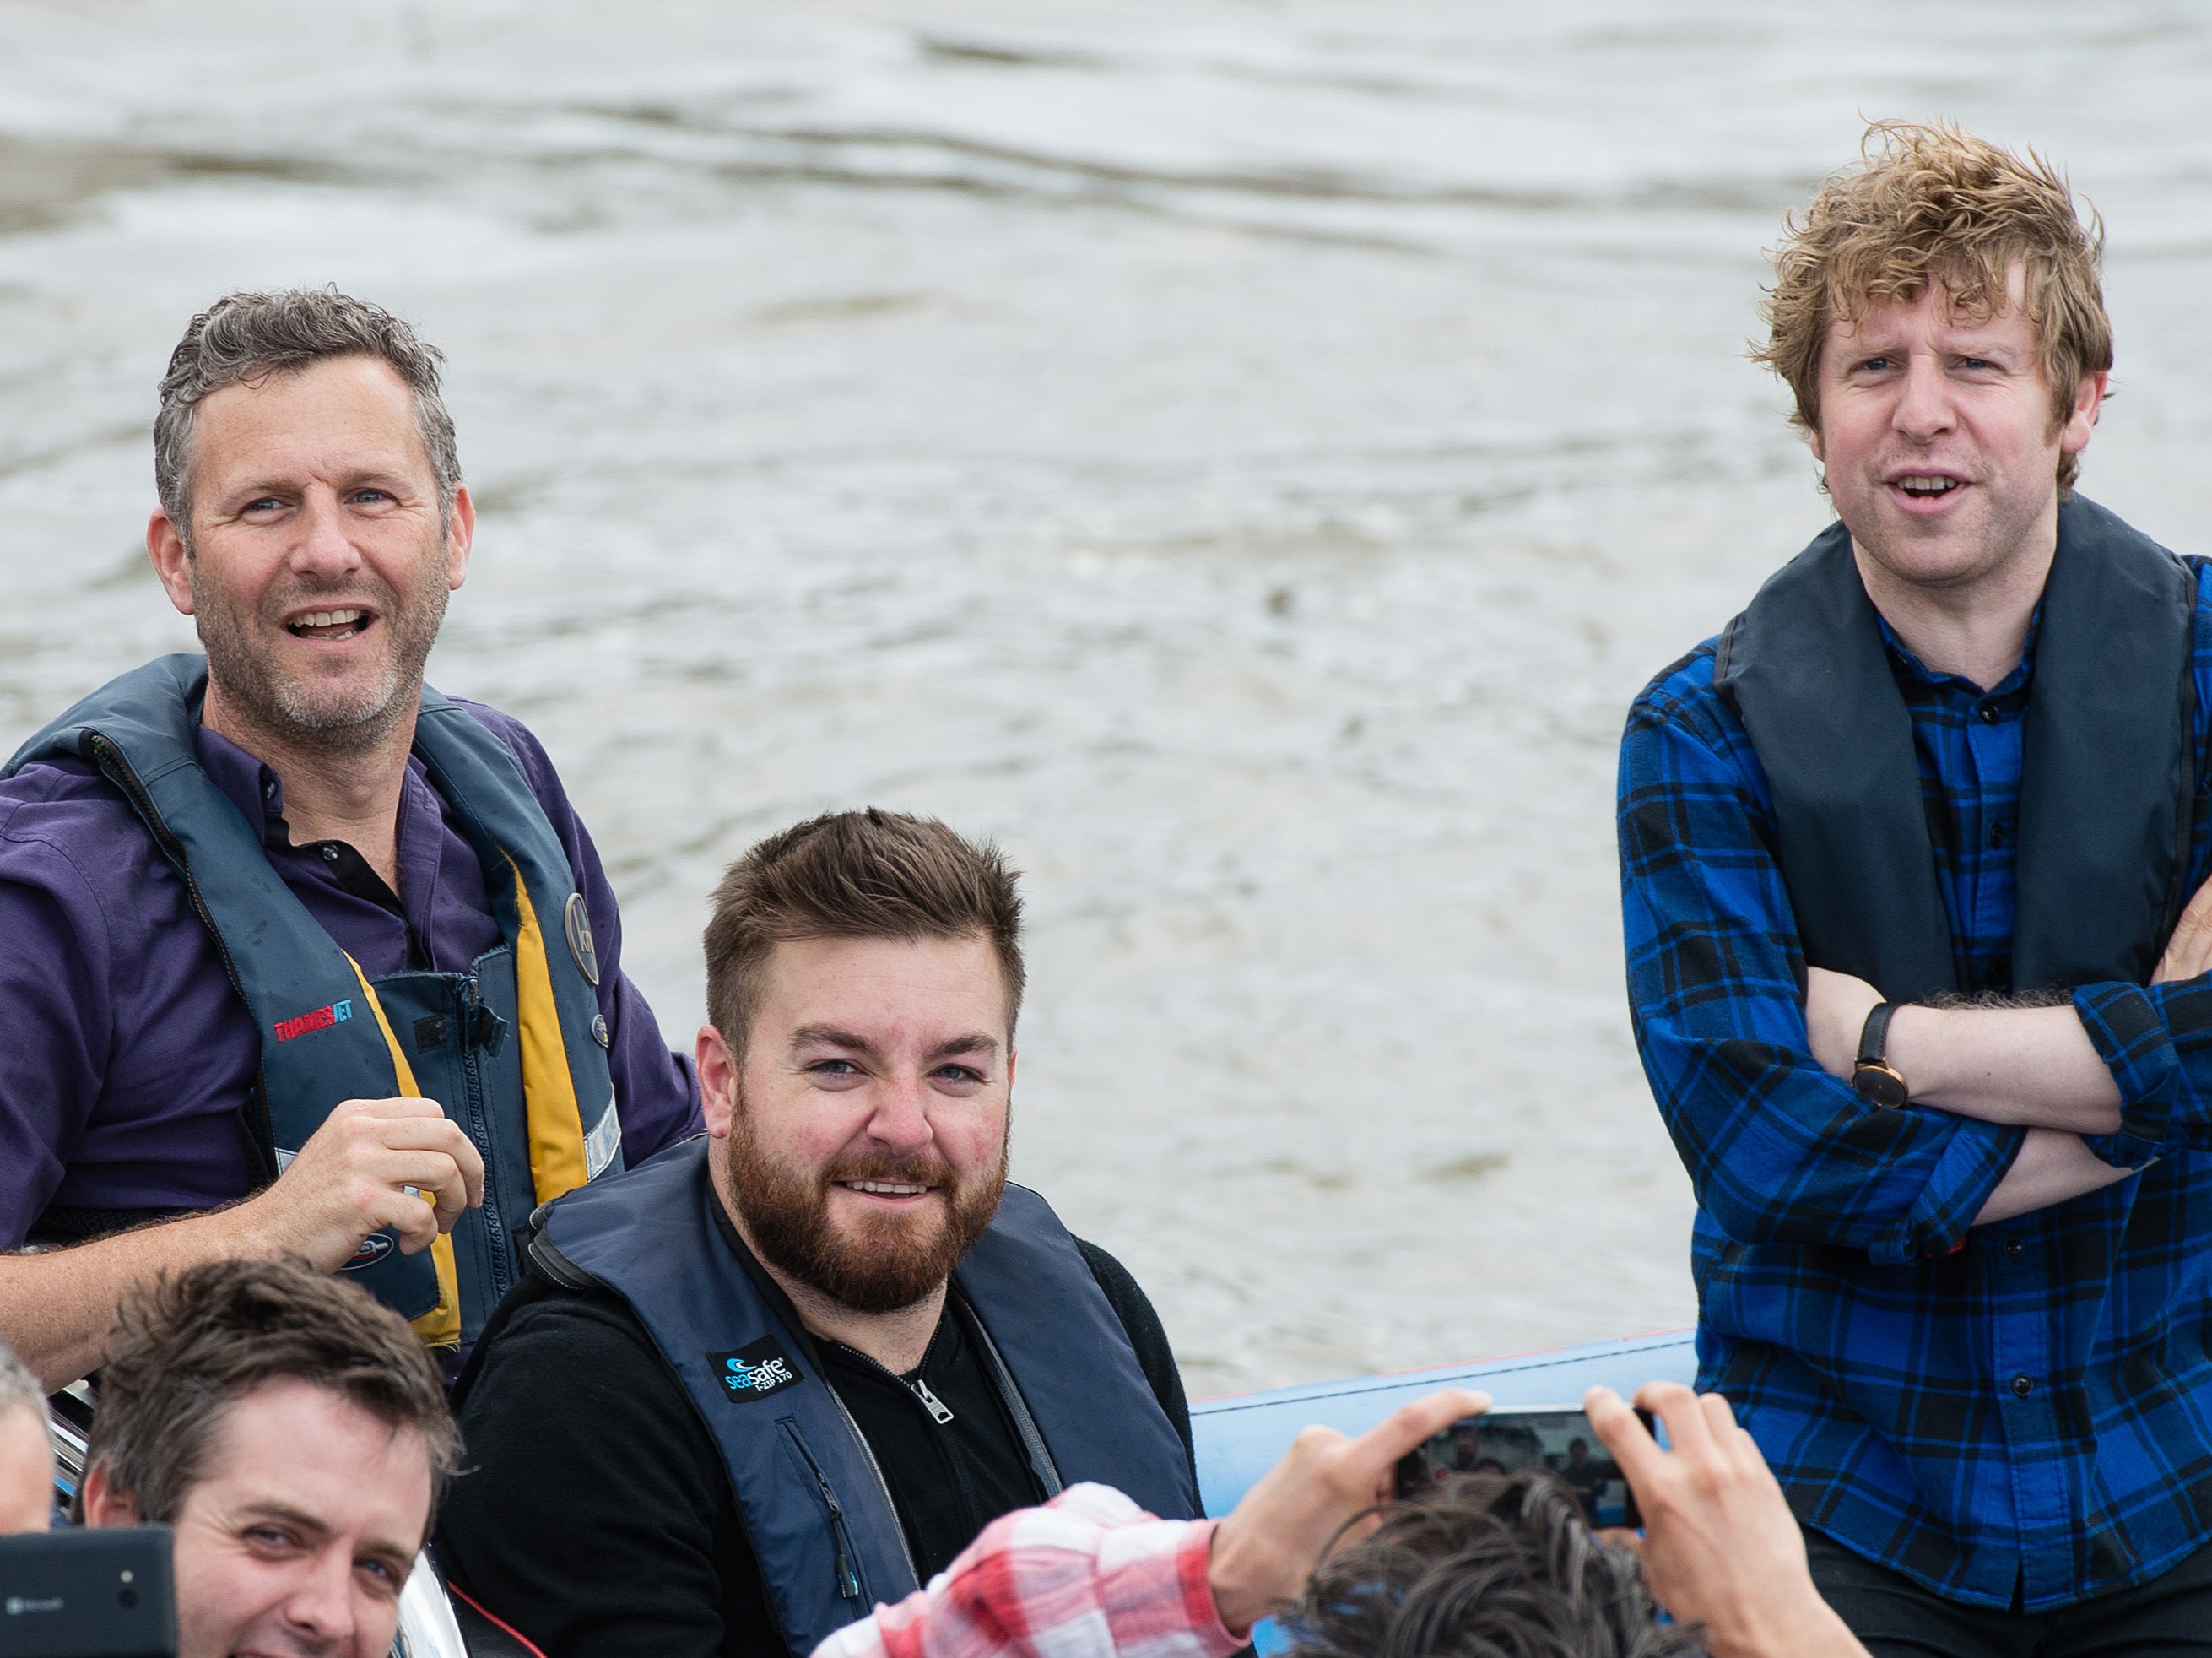 Brooker (centre) and ‘Last Leg’ co-hosts Adam Hills and Josh Widdicombe pursuing Nigel Farage for an interview in a boat on the River Thames in June 2016